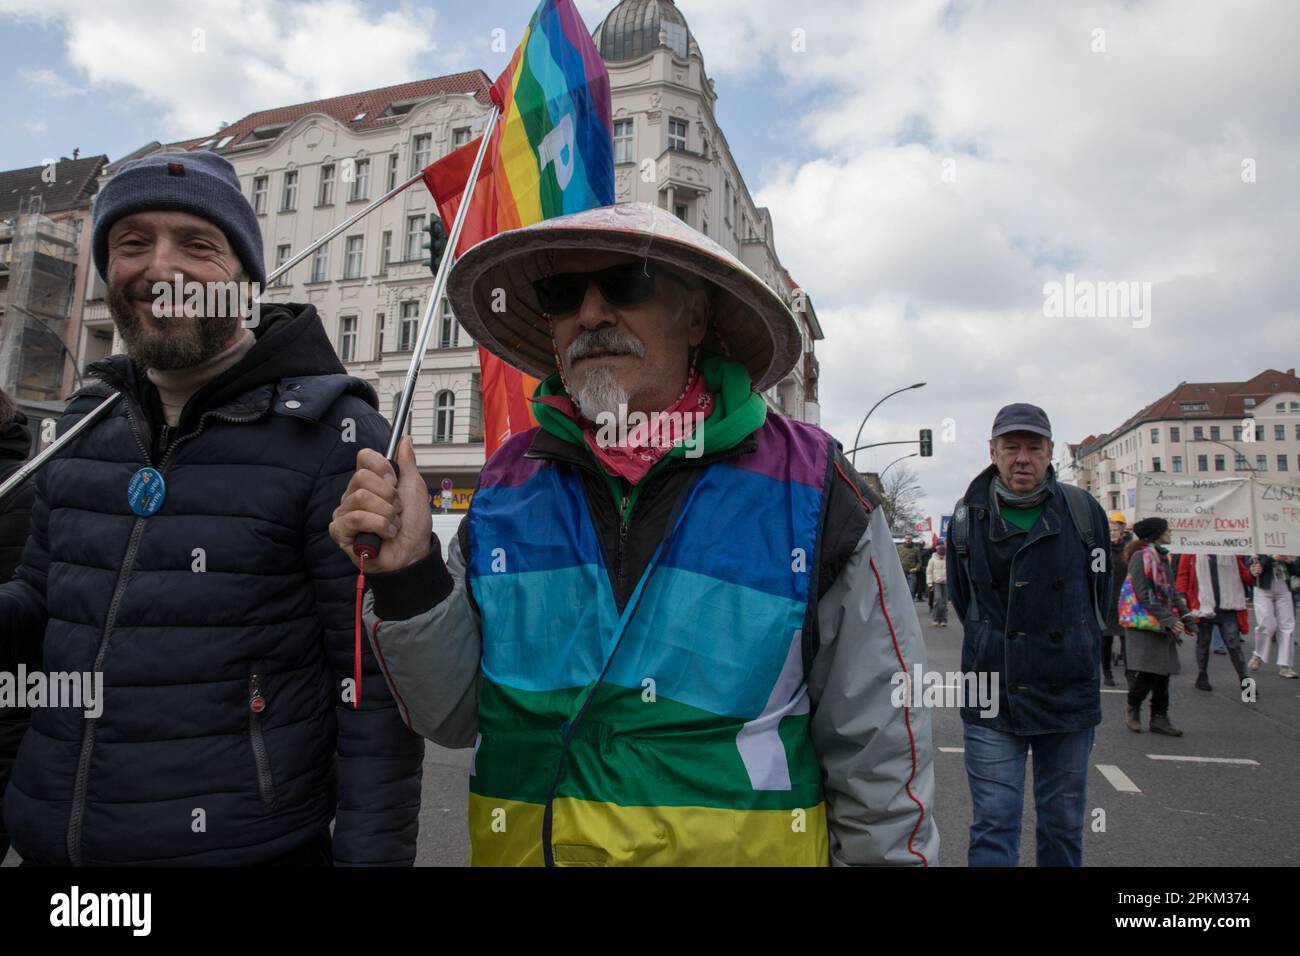 Berlin, Germany: April 8, 2023, At least 1,500 people demonstrated in Berlin on April 8, 2023, during the Easter March for worldwide disarmament and a ceasefire in Ukraine. The organizers reported nearly 2,000 participants, while the police estimated 1,500. Luehr Henken, co-spokesperson for the Federal Peace Council, called for an end to the war in Ukraine as quickly as possible from the speaker's podium. After the opening, the protesters marched through the Wedding district in central Berlin. Credit: ZUMA Press, Inc./Alamy Live News Stock Photo